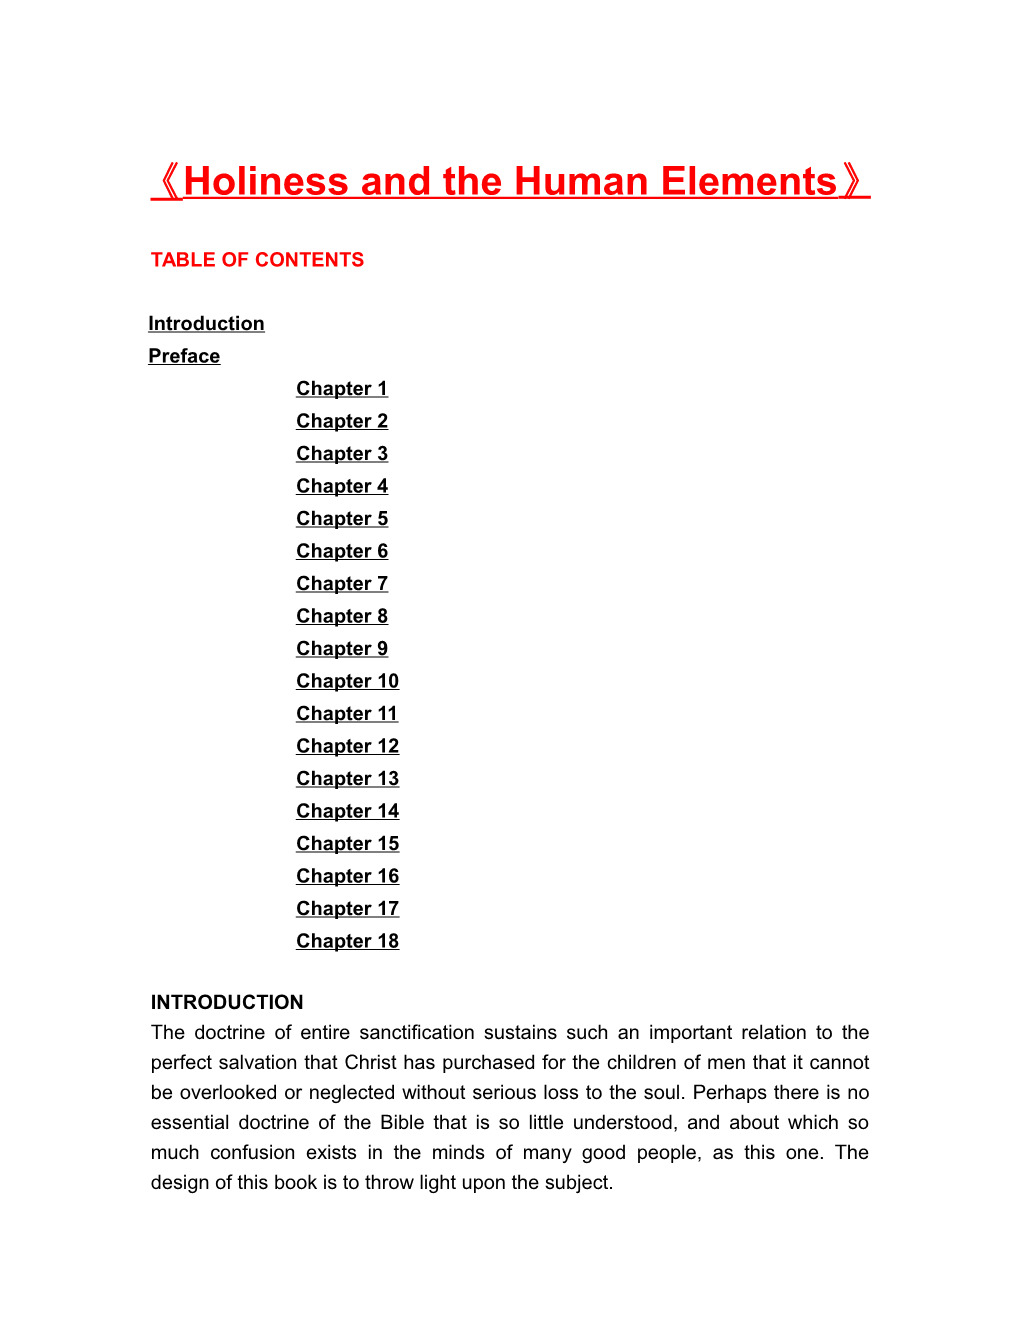 Holiness and the Human Elements